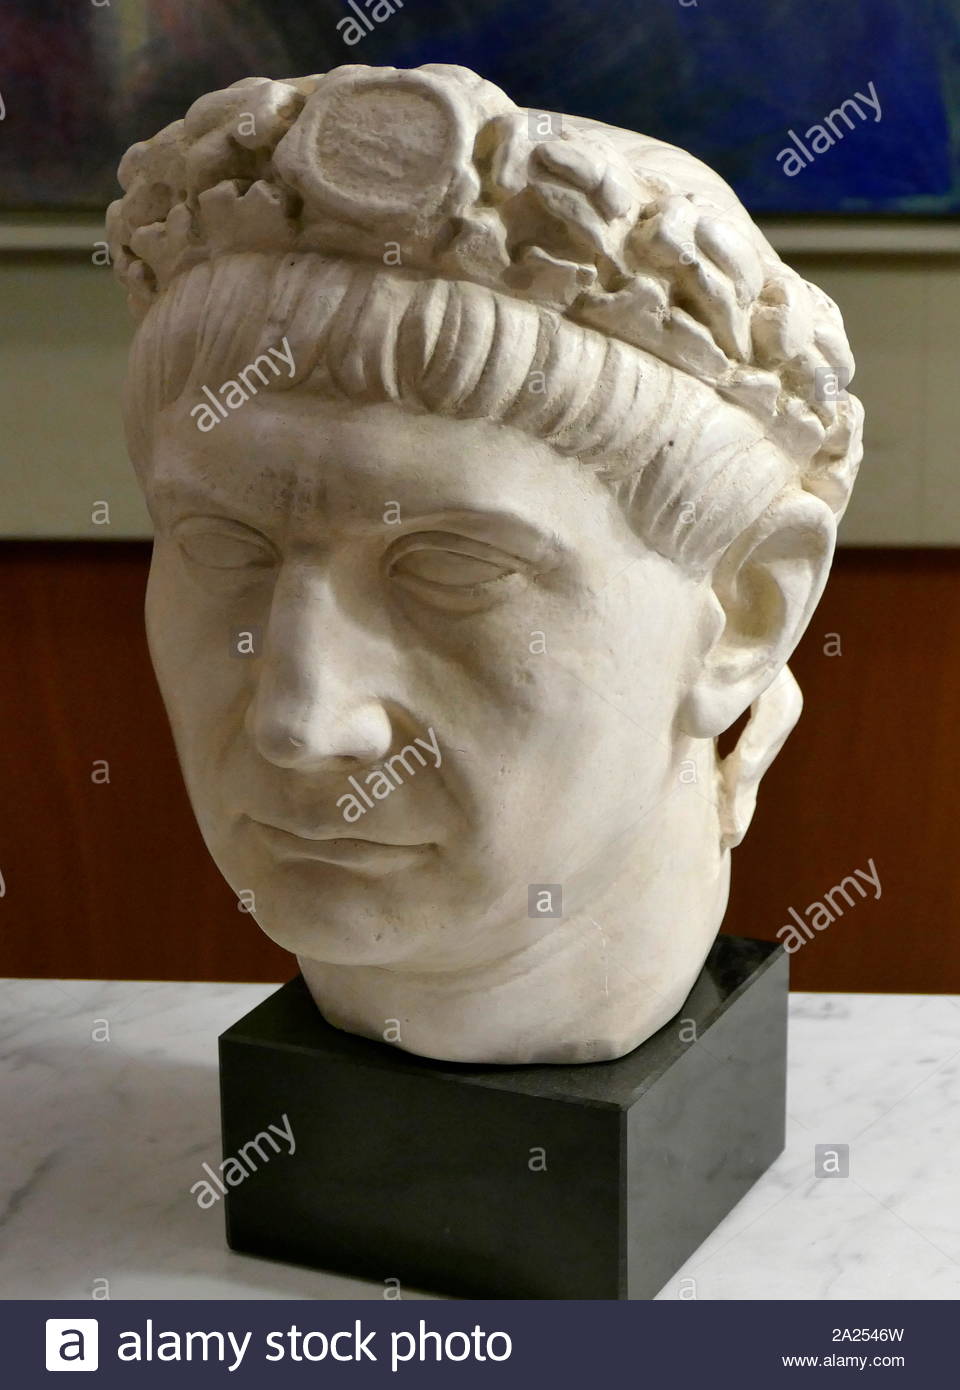 Copy of a Roman bust of Trajan ( 53 -  117 AD). Roman emperor from 98 to 117 AD. Officially declared by the Senate optimus princeps ('the best ruler'), Trajan is remembered as a successful soldier-emperor who presided over the greatest military expansion in Roman history Stock Photo